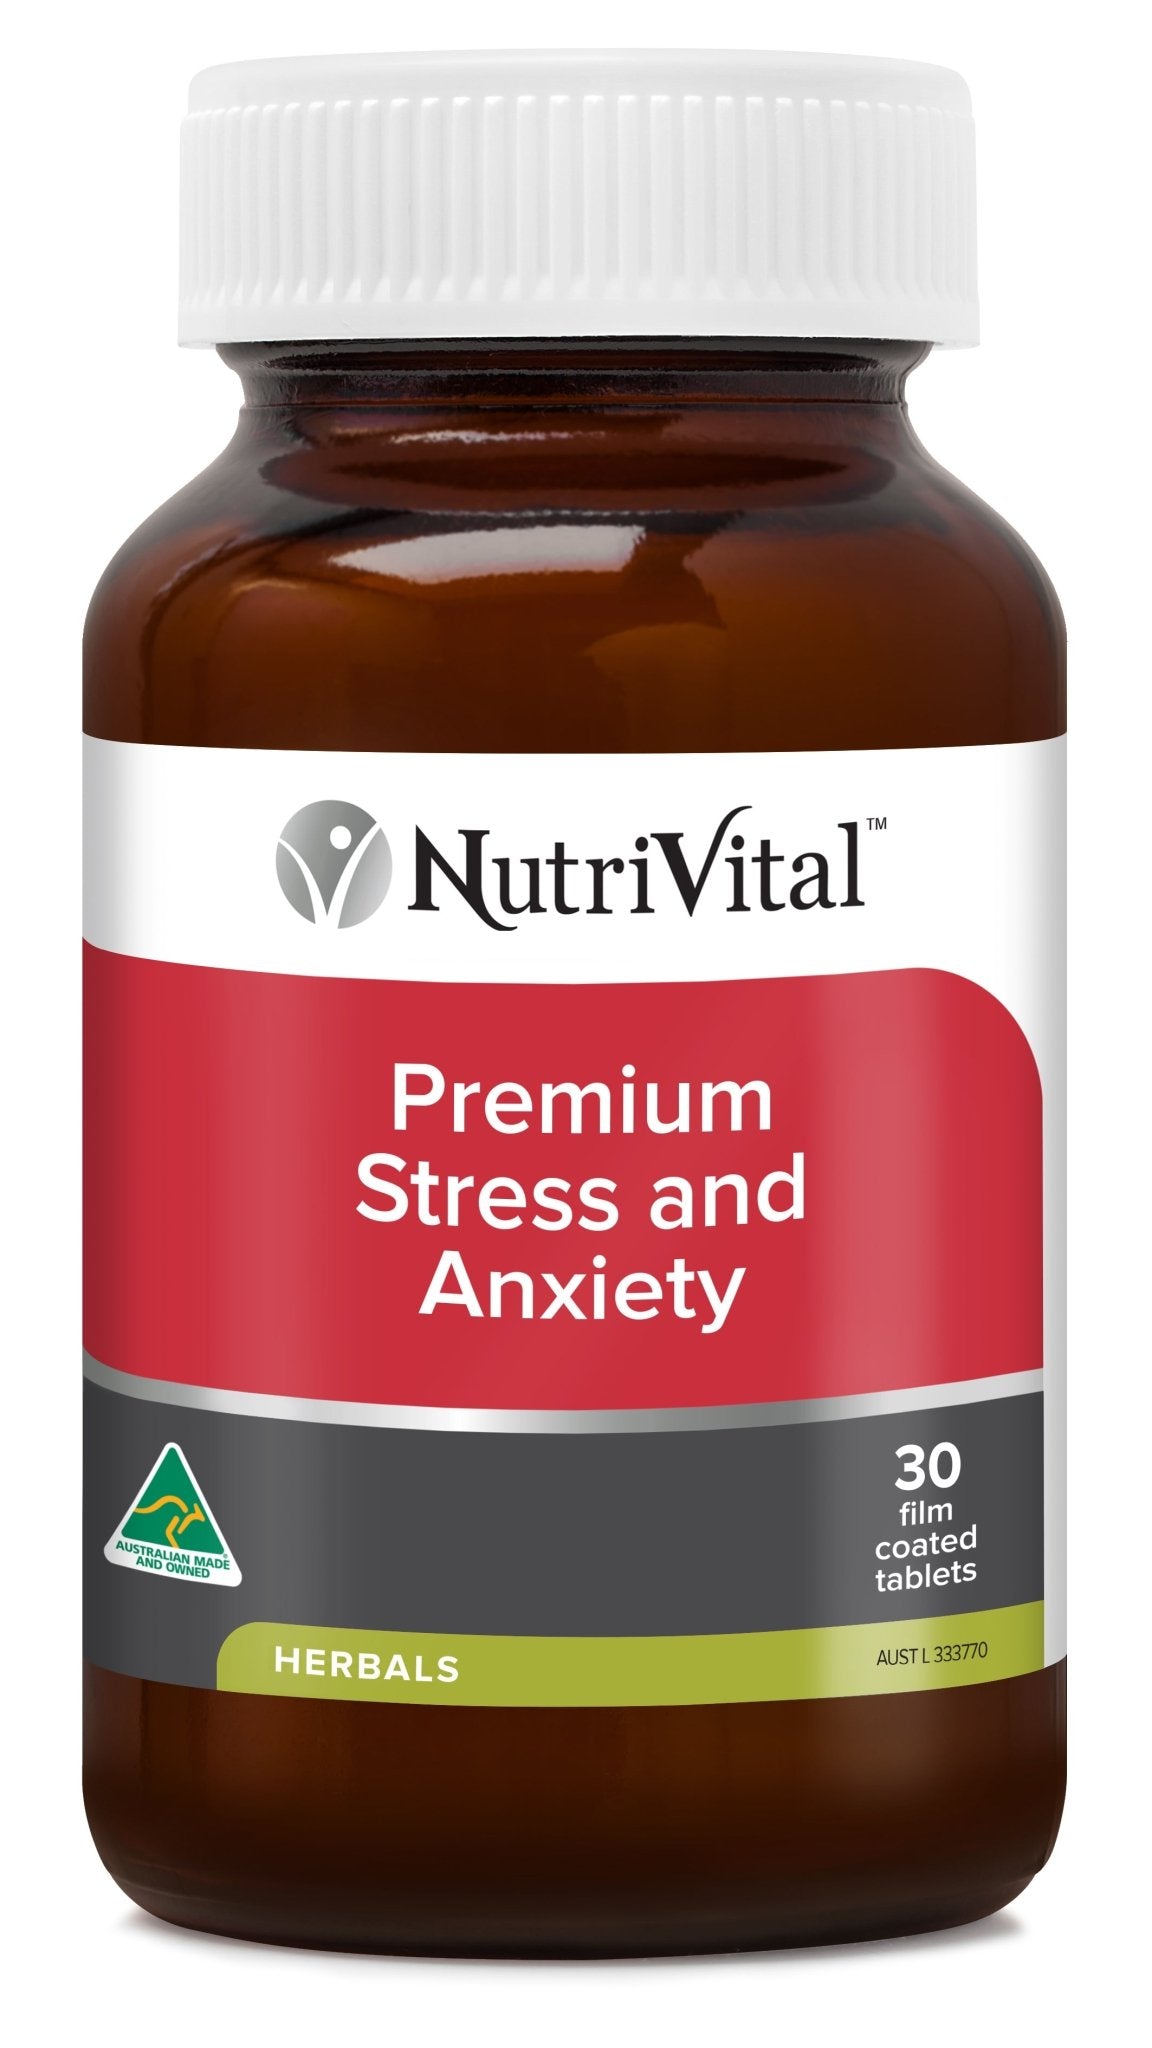 NutriVital Premium Stress & Anxiety Tablets 30 tablets - Dr Earth - Supplements, Nutrivital